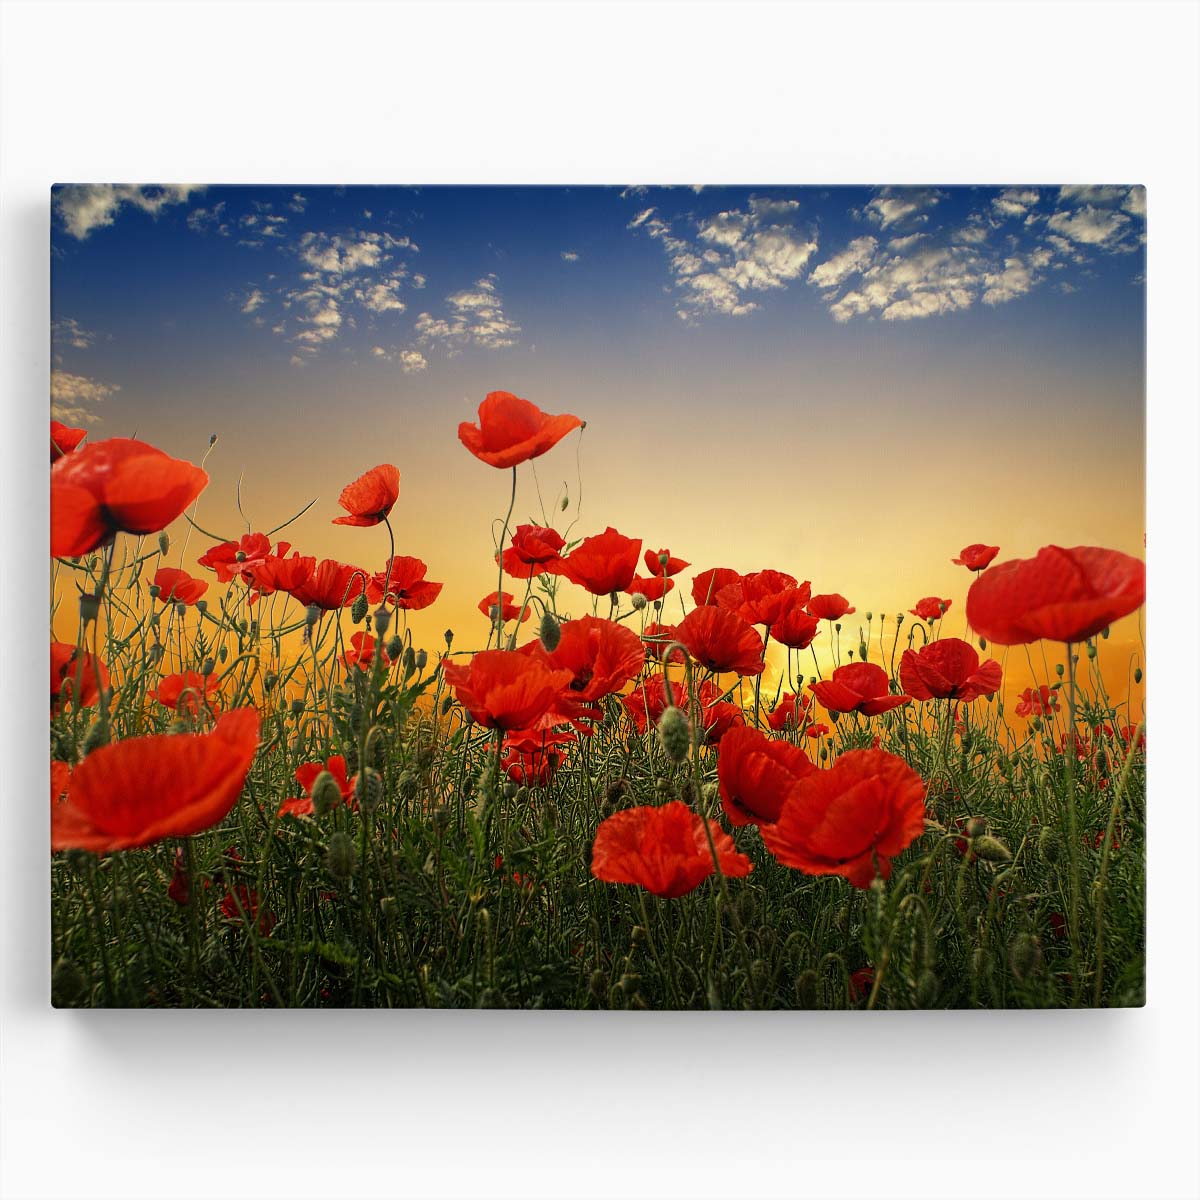 Romantic Red Poppy Field at Sunset Photography Wall Art by Luxuriance Designs. Made in USA.